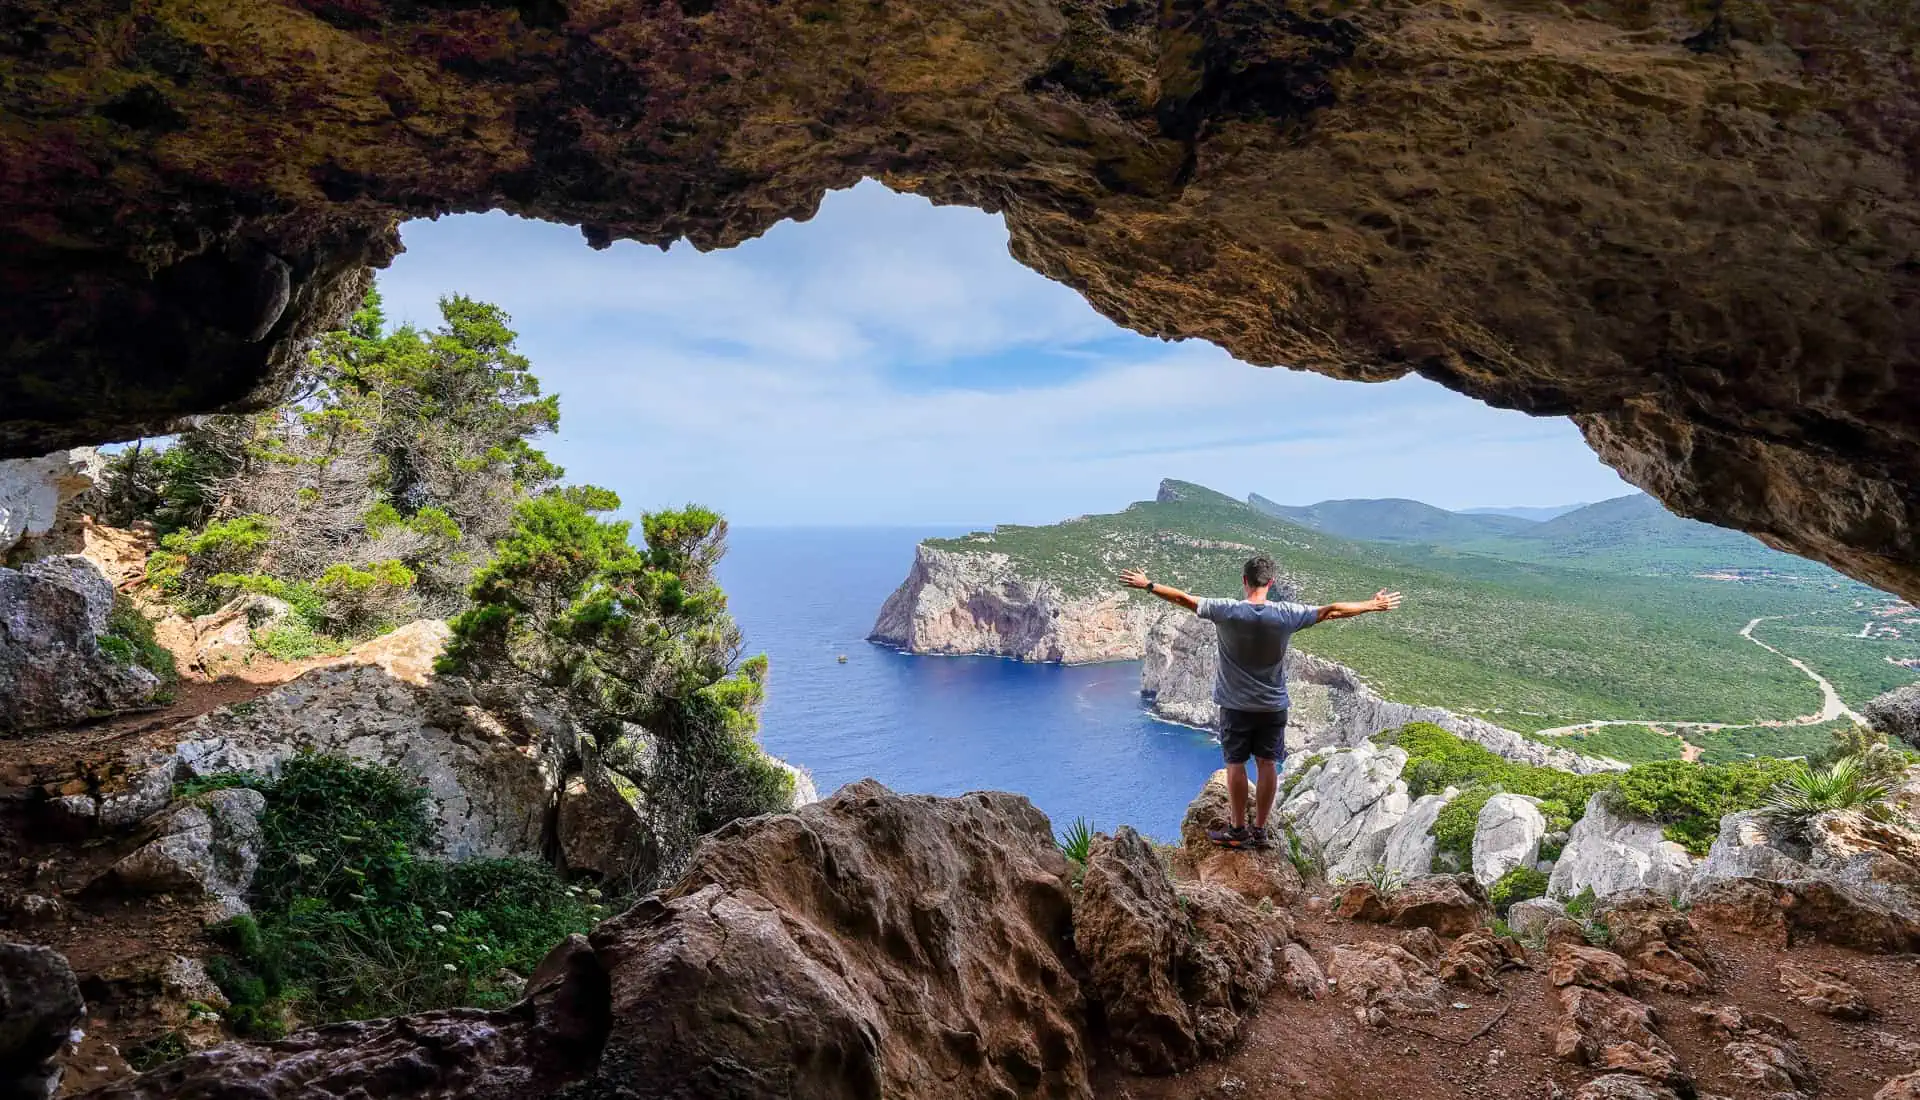 The incredible ocean and peninsula views from Grotta delle Brocche Rotte were a highlight of our Sardinia Itinerary